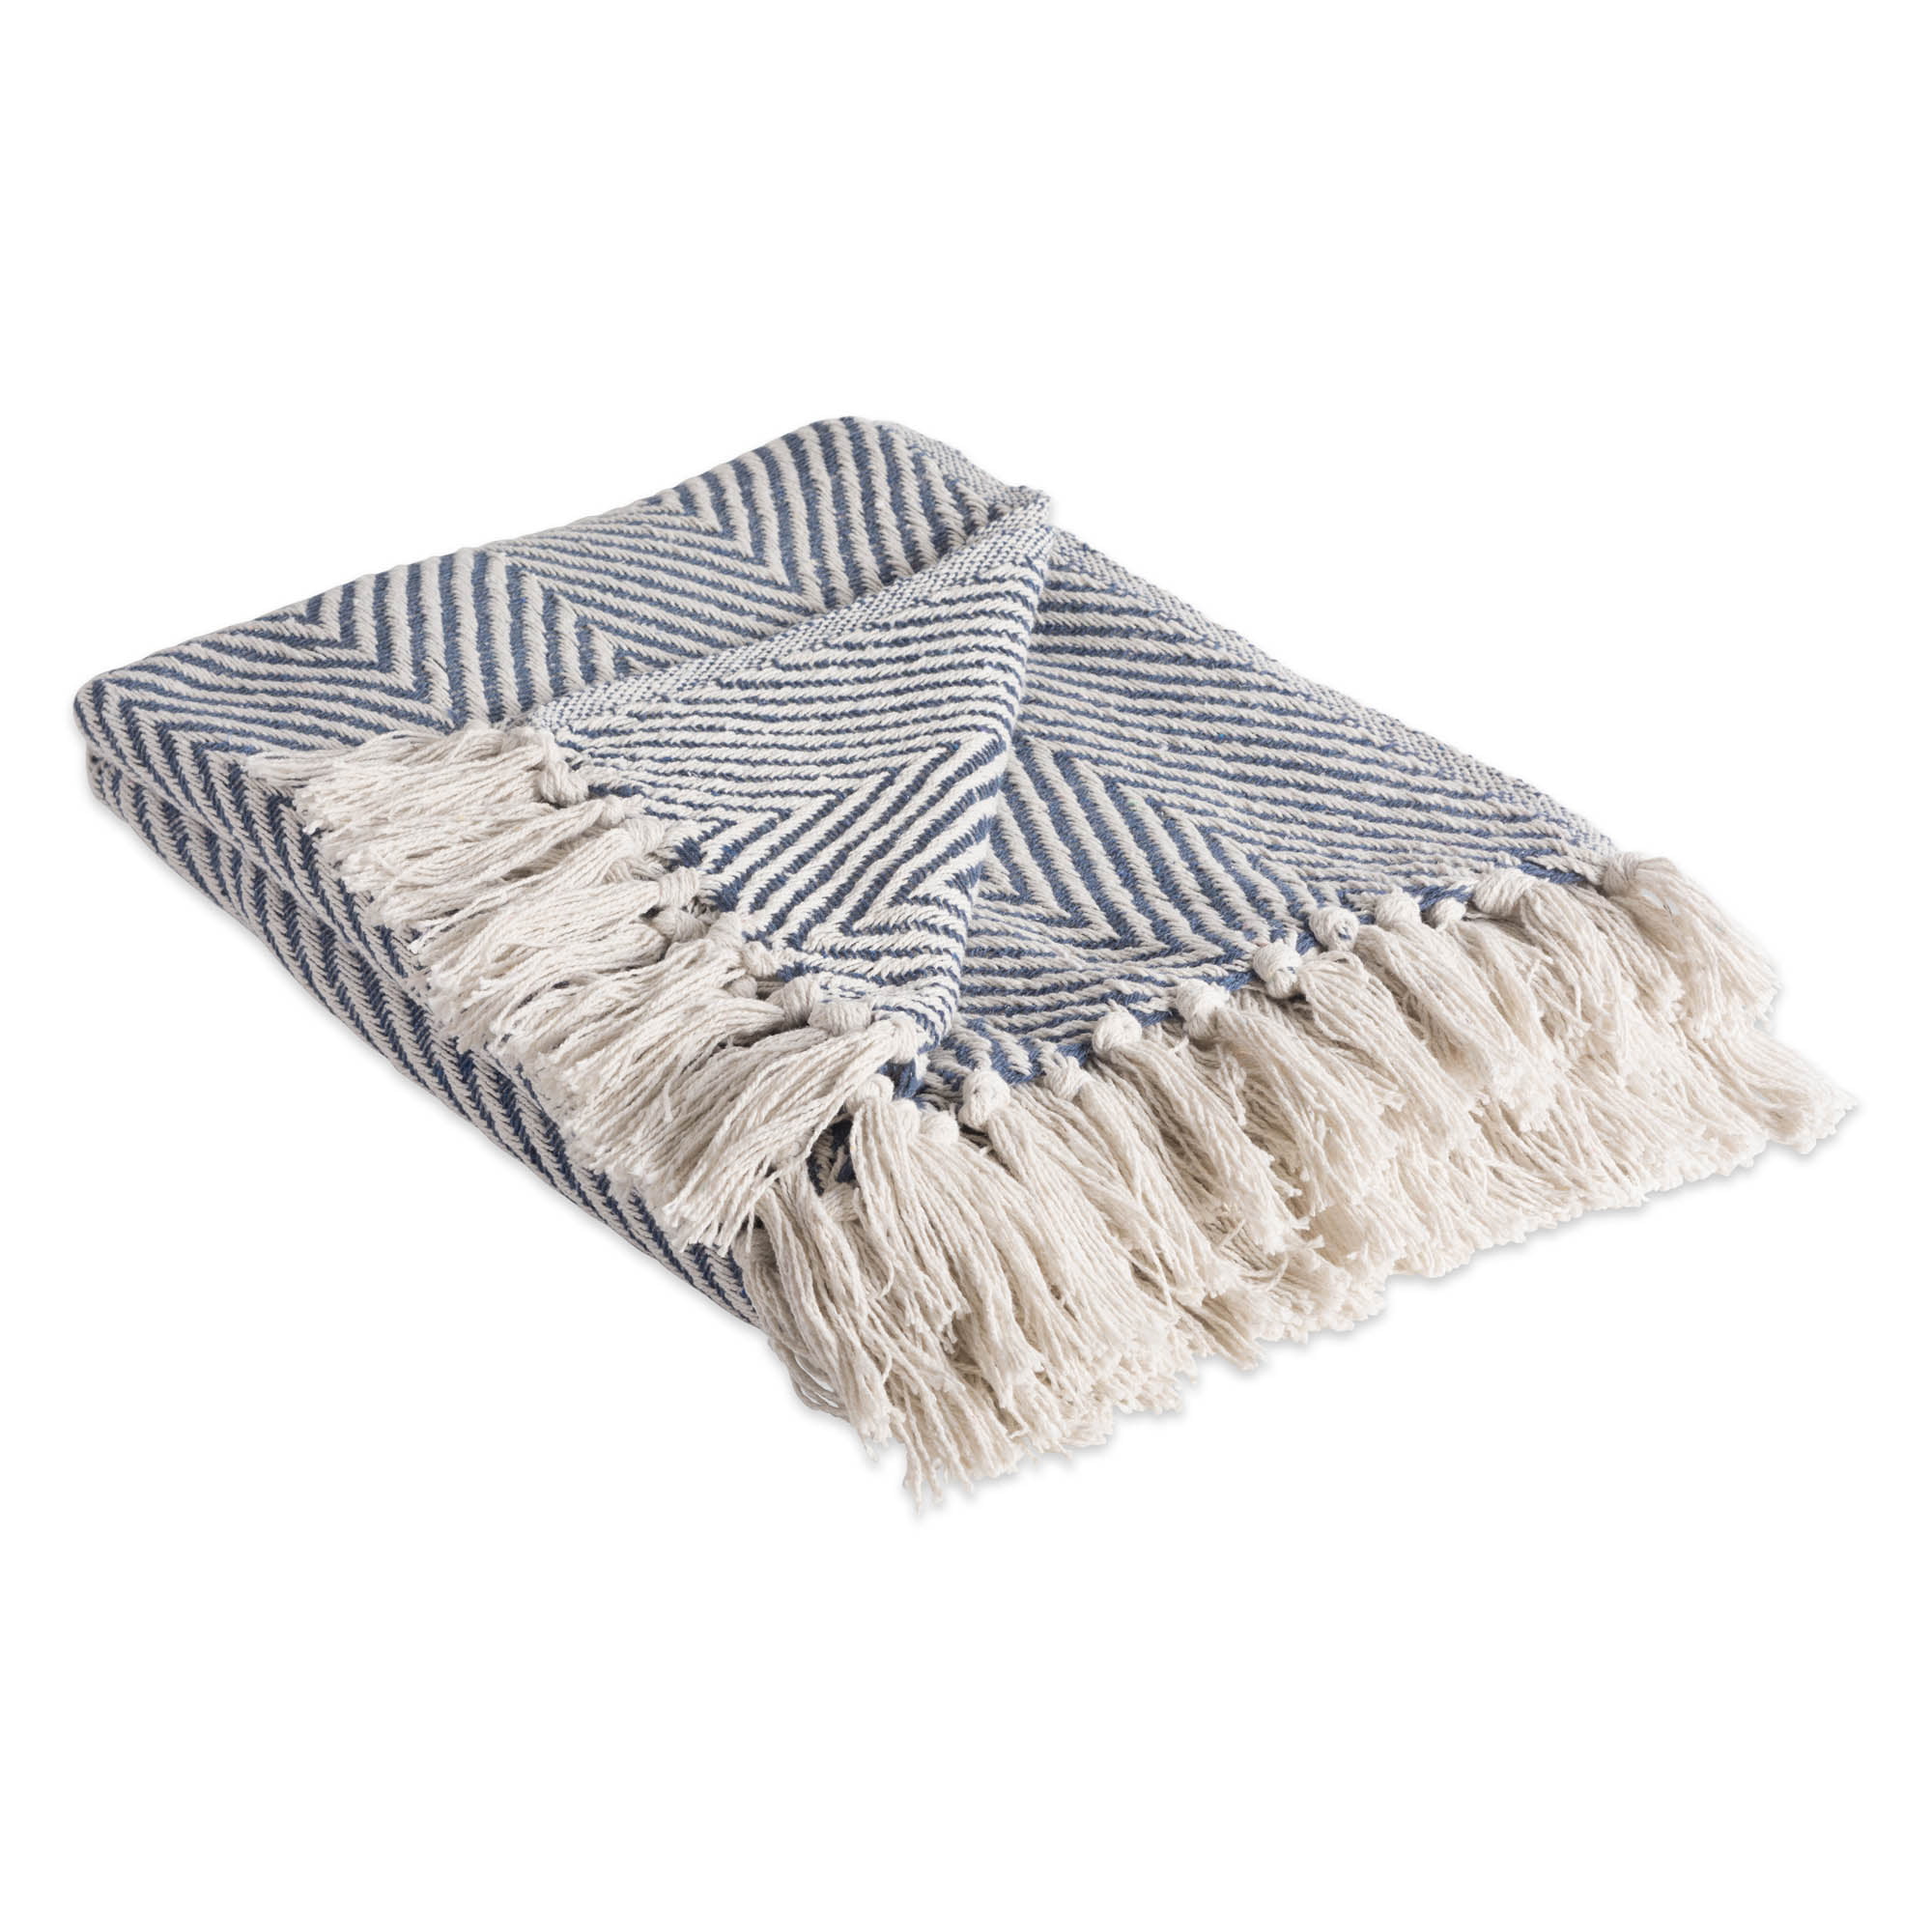 Couch, Details about   DII Rustic Farmhouse Cotton Chevron Blanket Throw with Fringe For Chair 